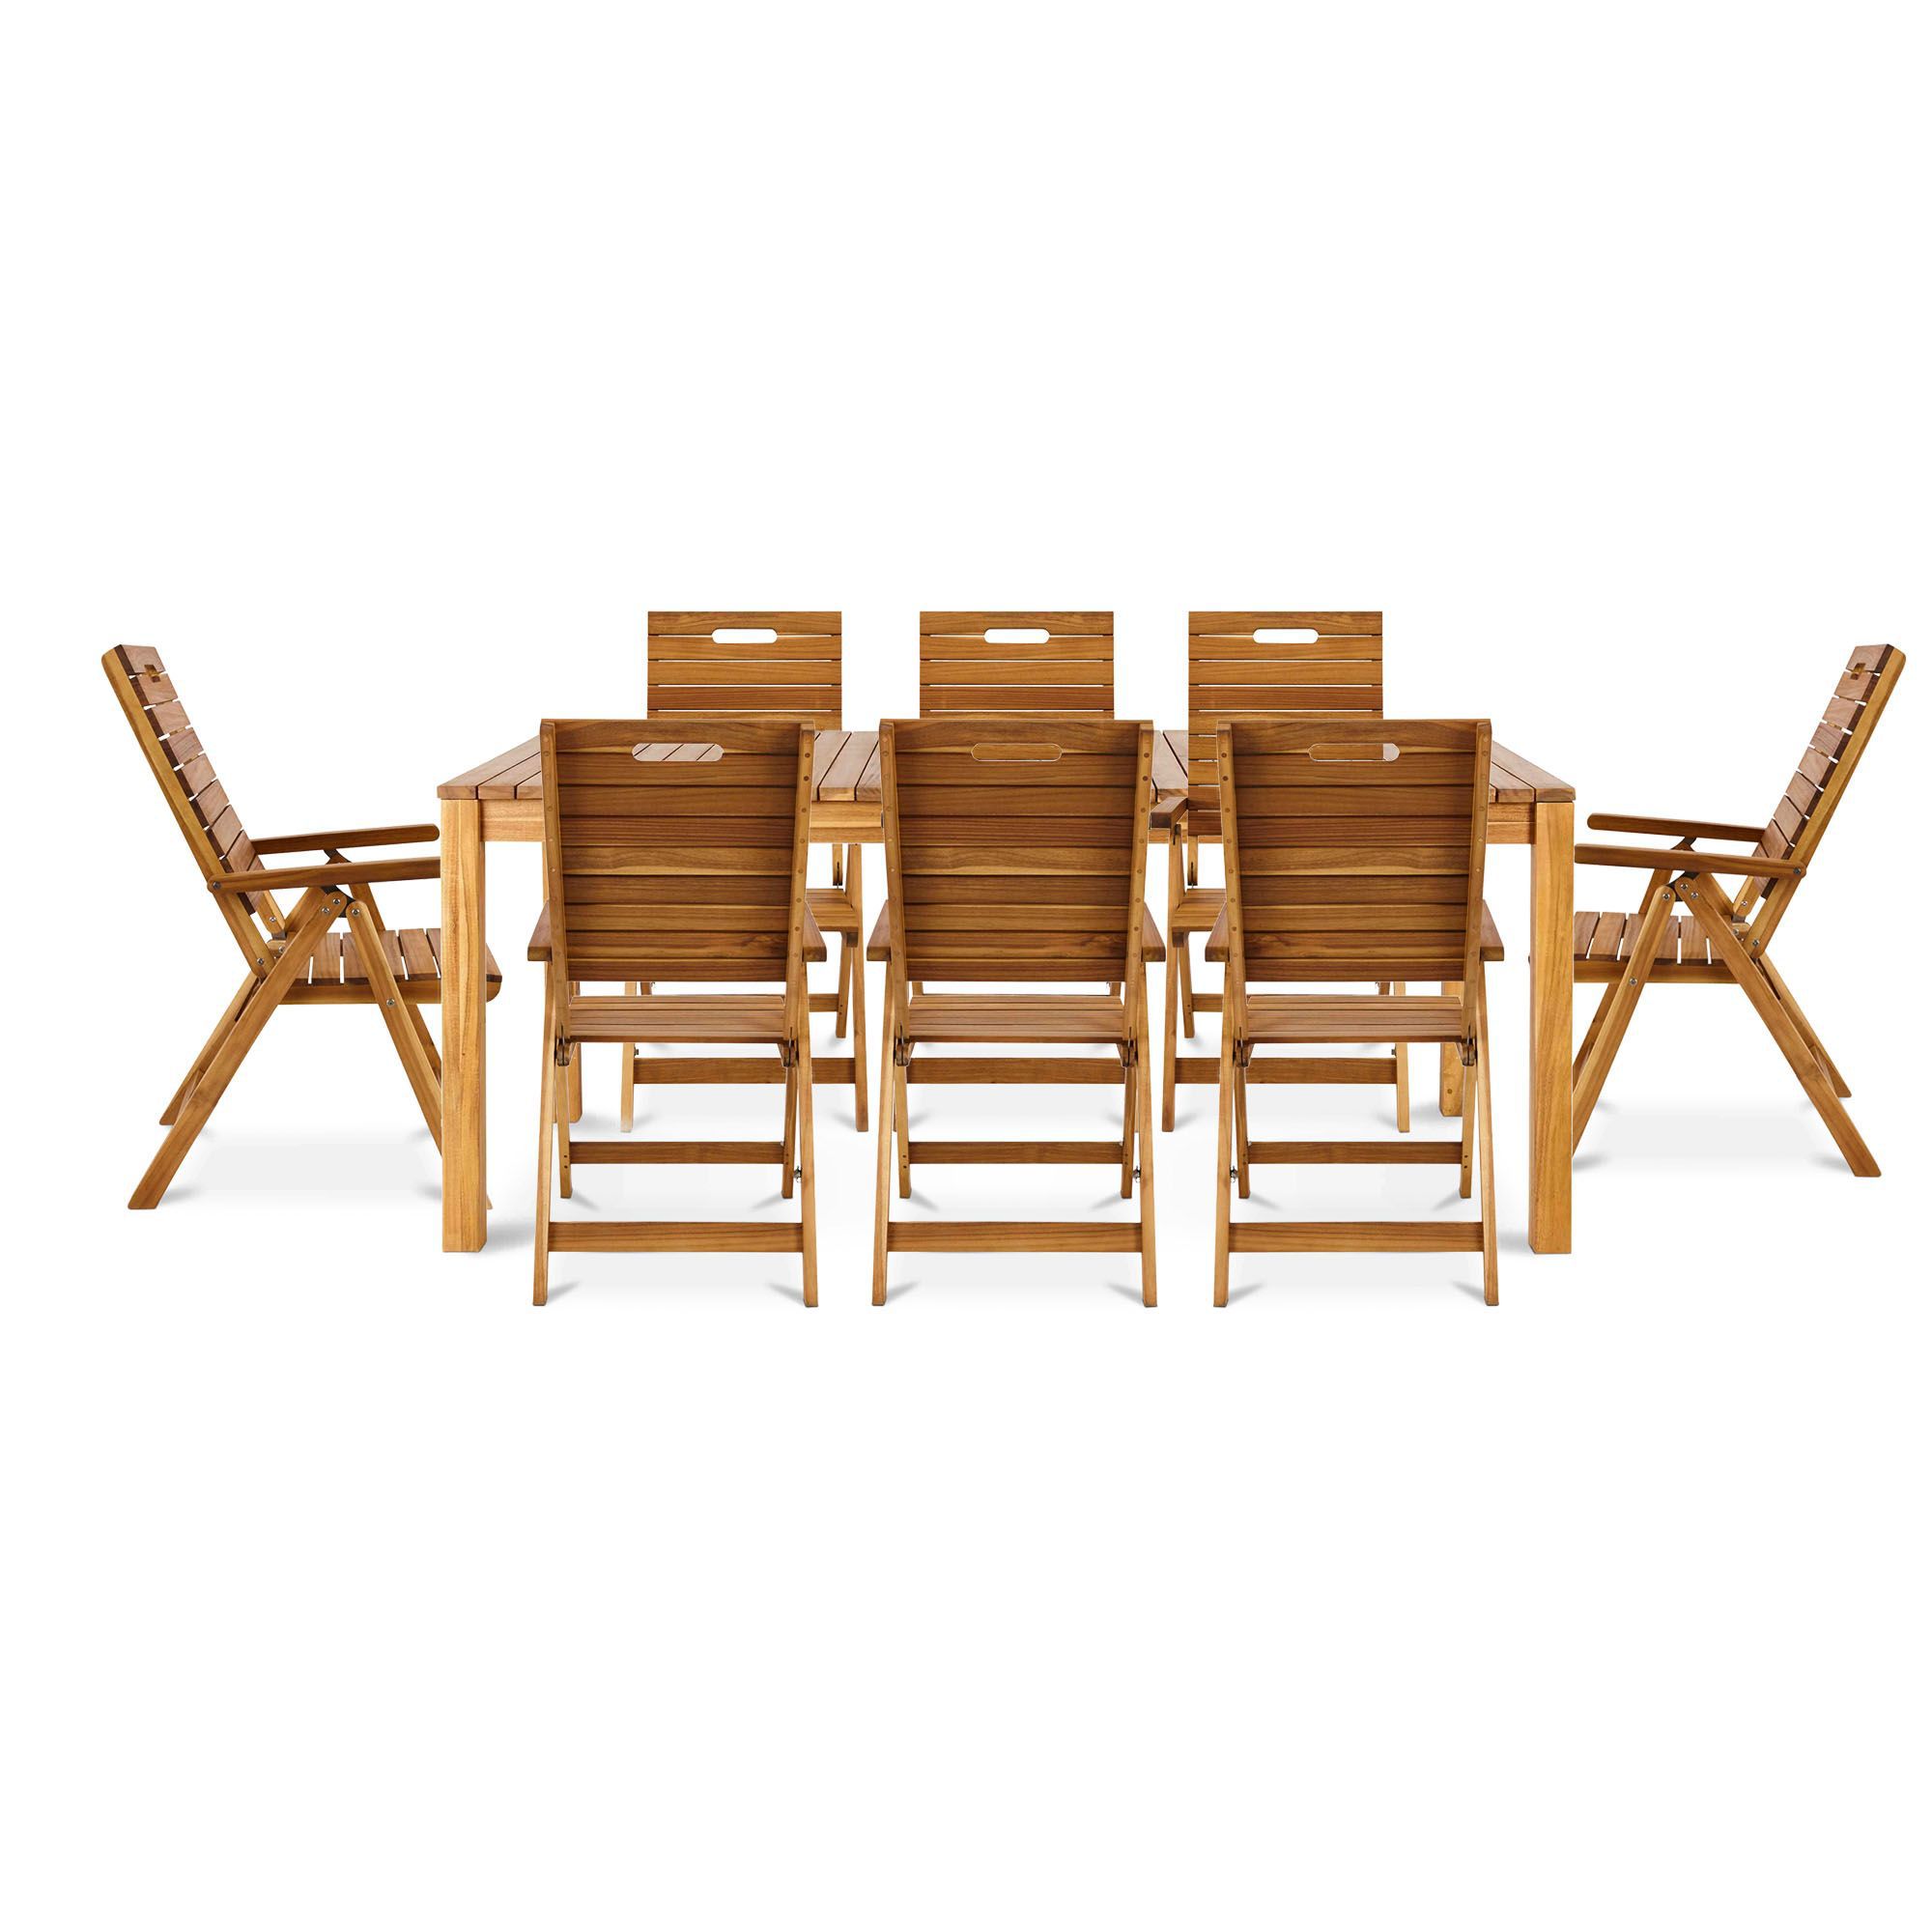 Denia Wooden 8 seater Dining set with Recliner chairs